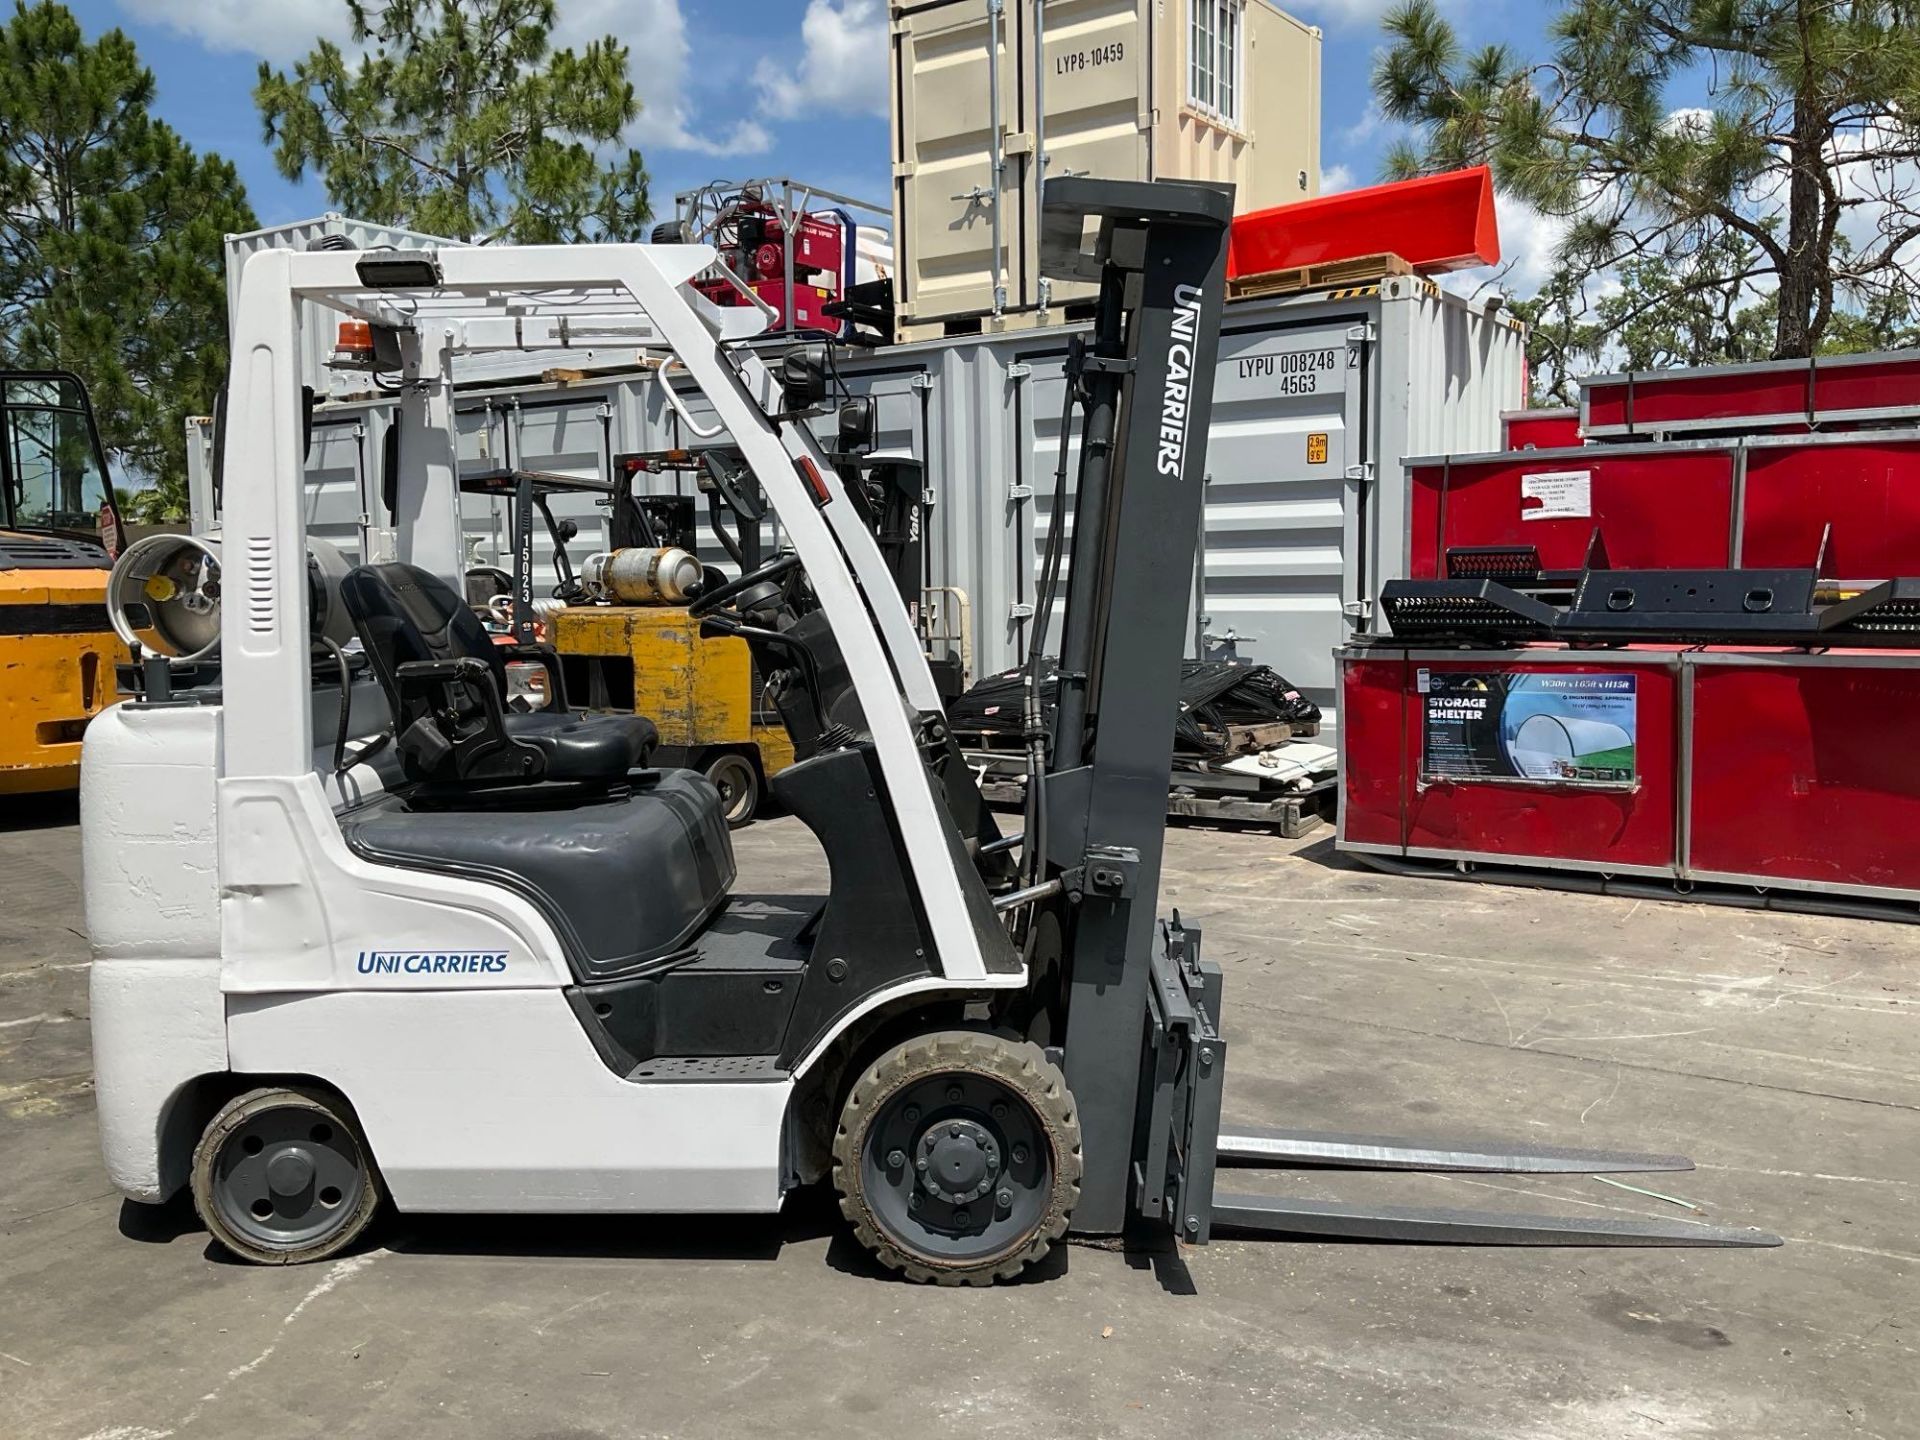 2018 UNICARRIERS FORKLIFT MODEL MCP1F2A28LV, LP POWERED - Image 6 of 12